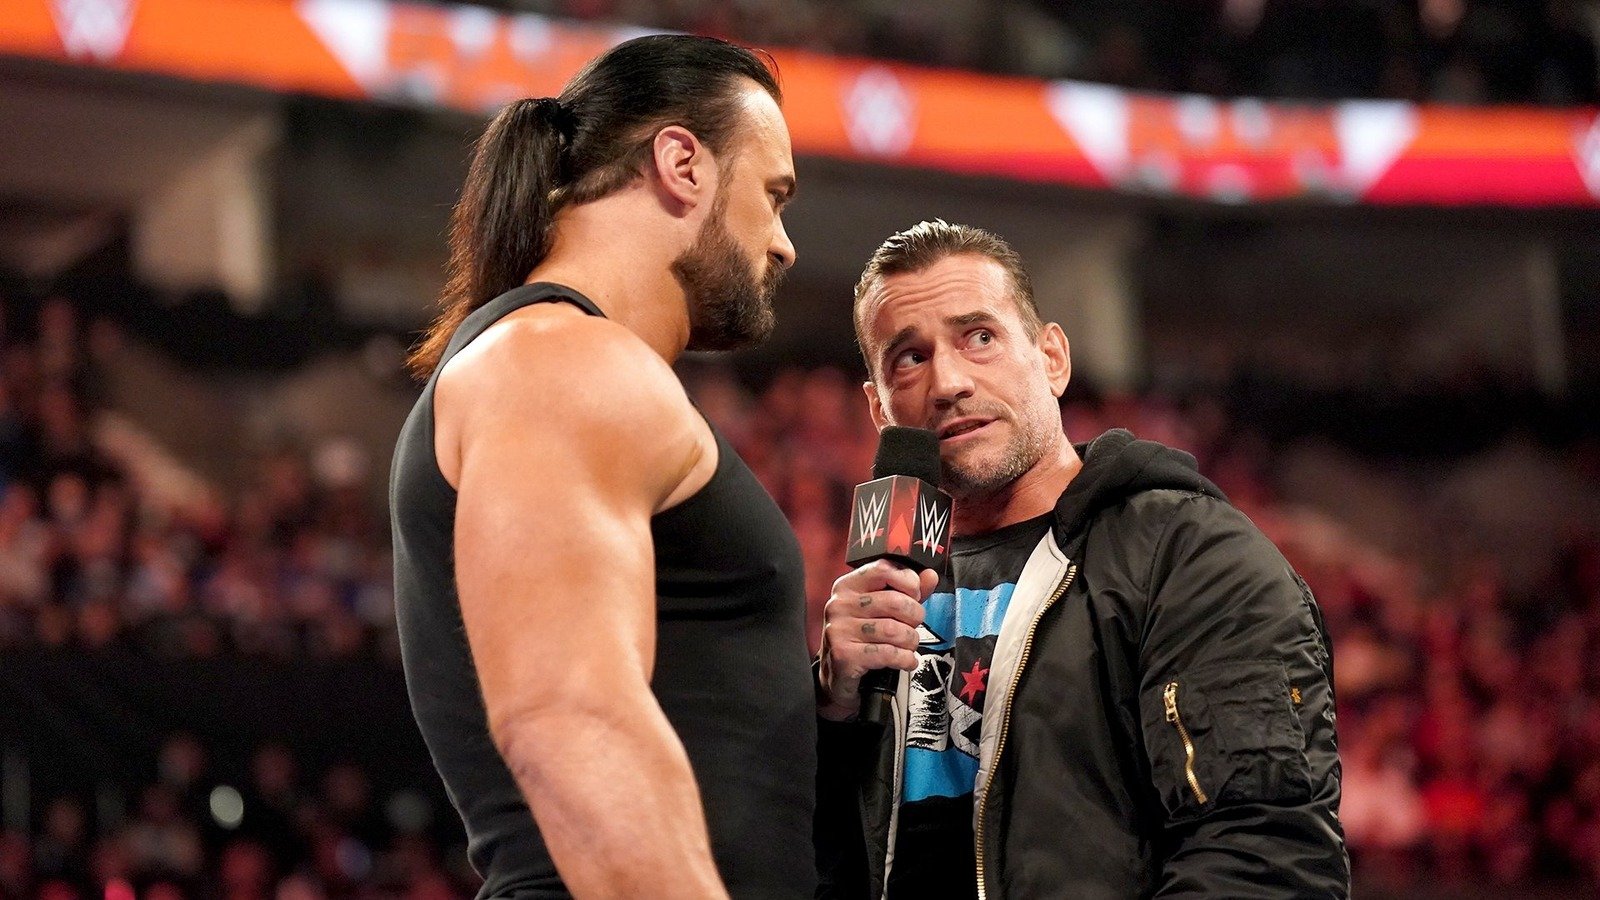 Drew McIntyre Continues to Taunt CM Punk – ‘I’d Run Away from Me Too!’